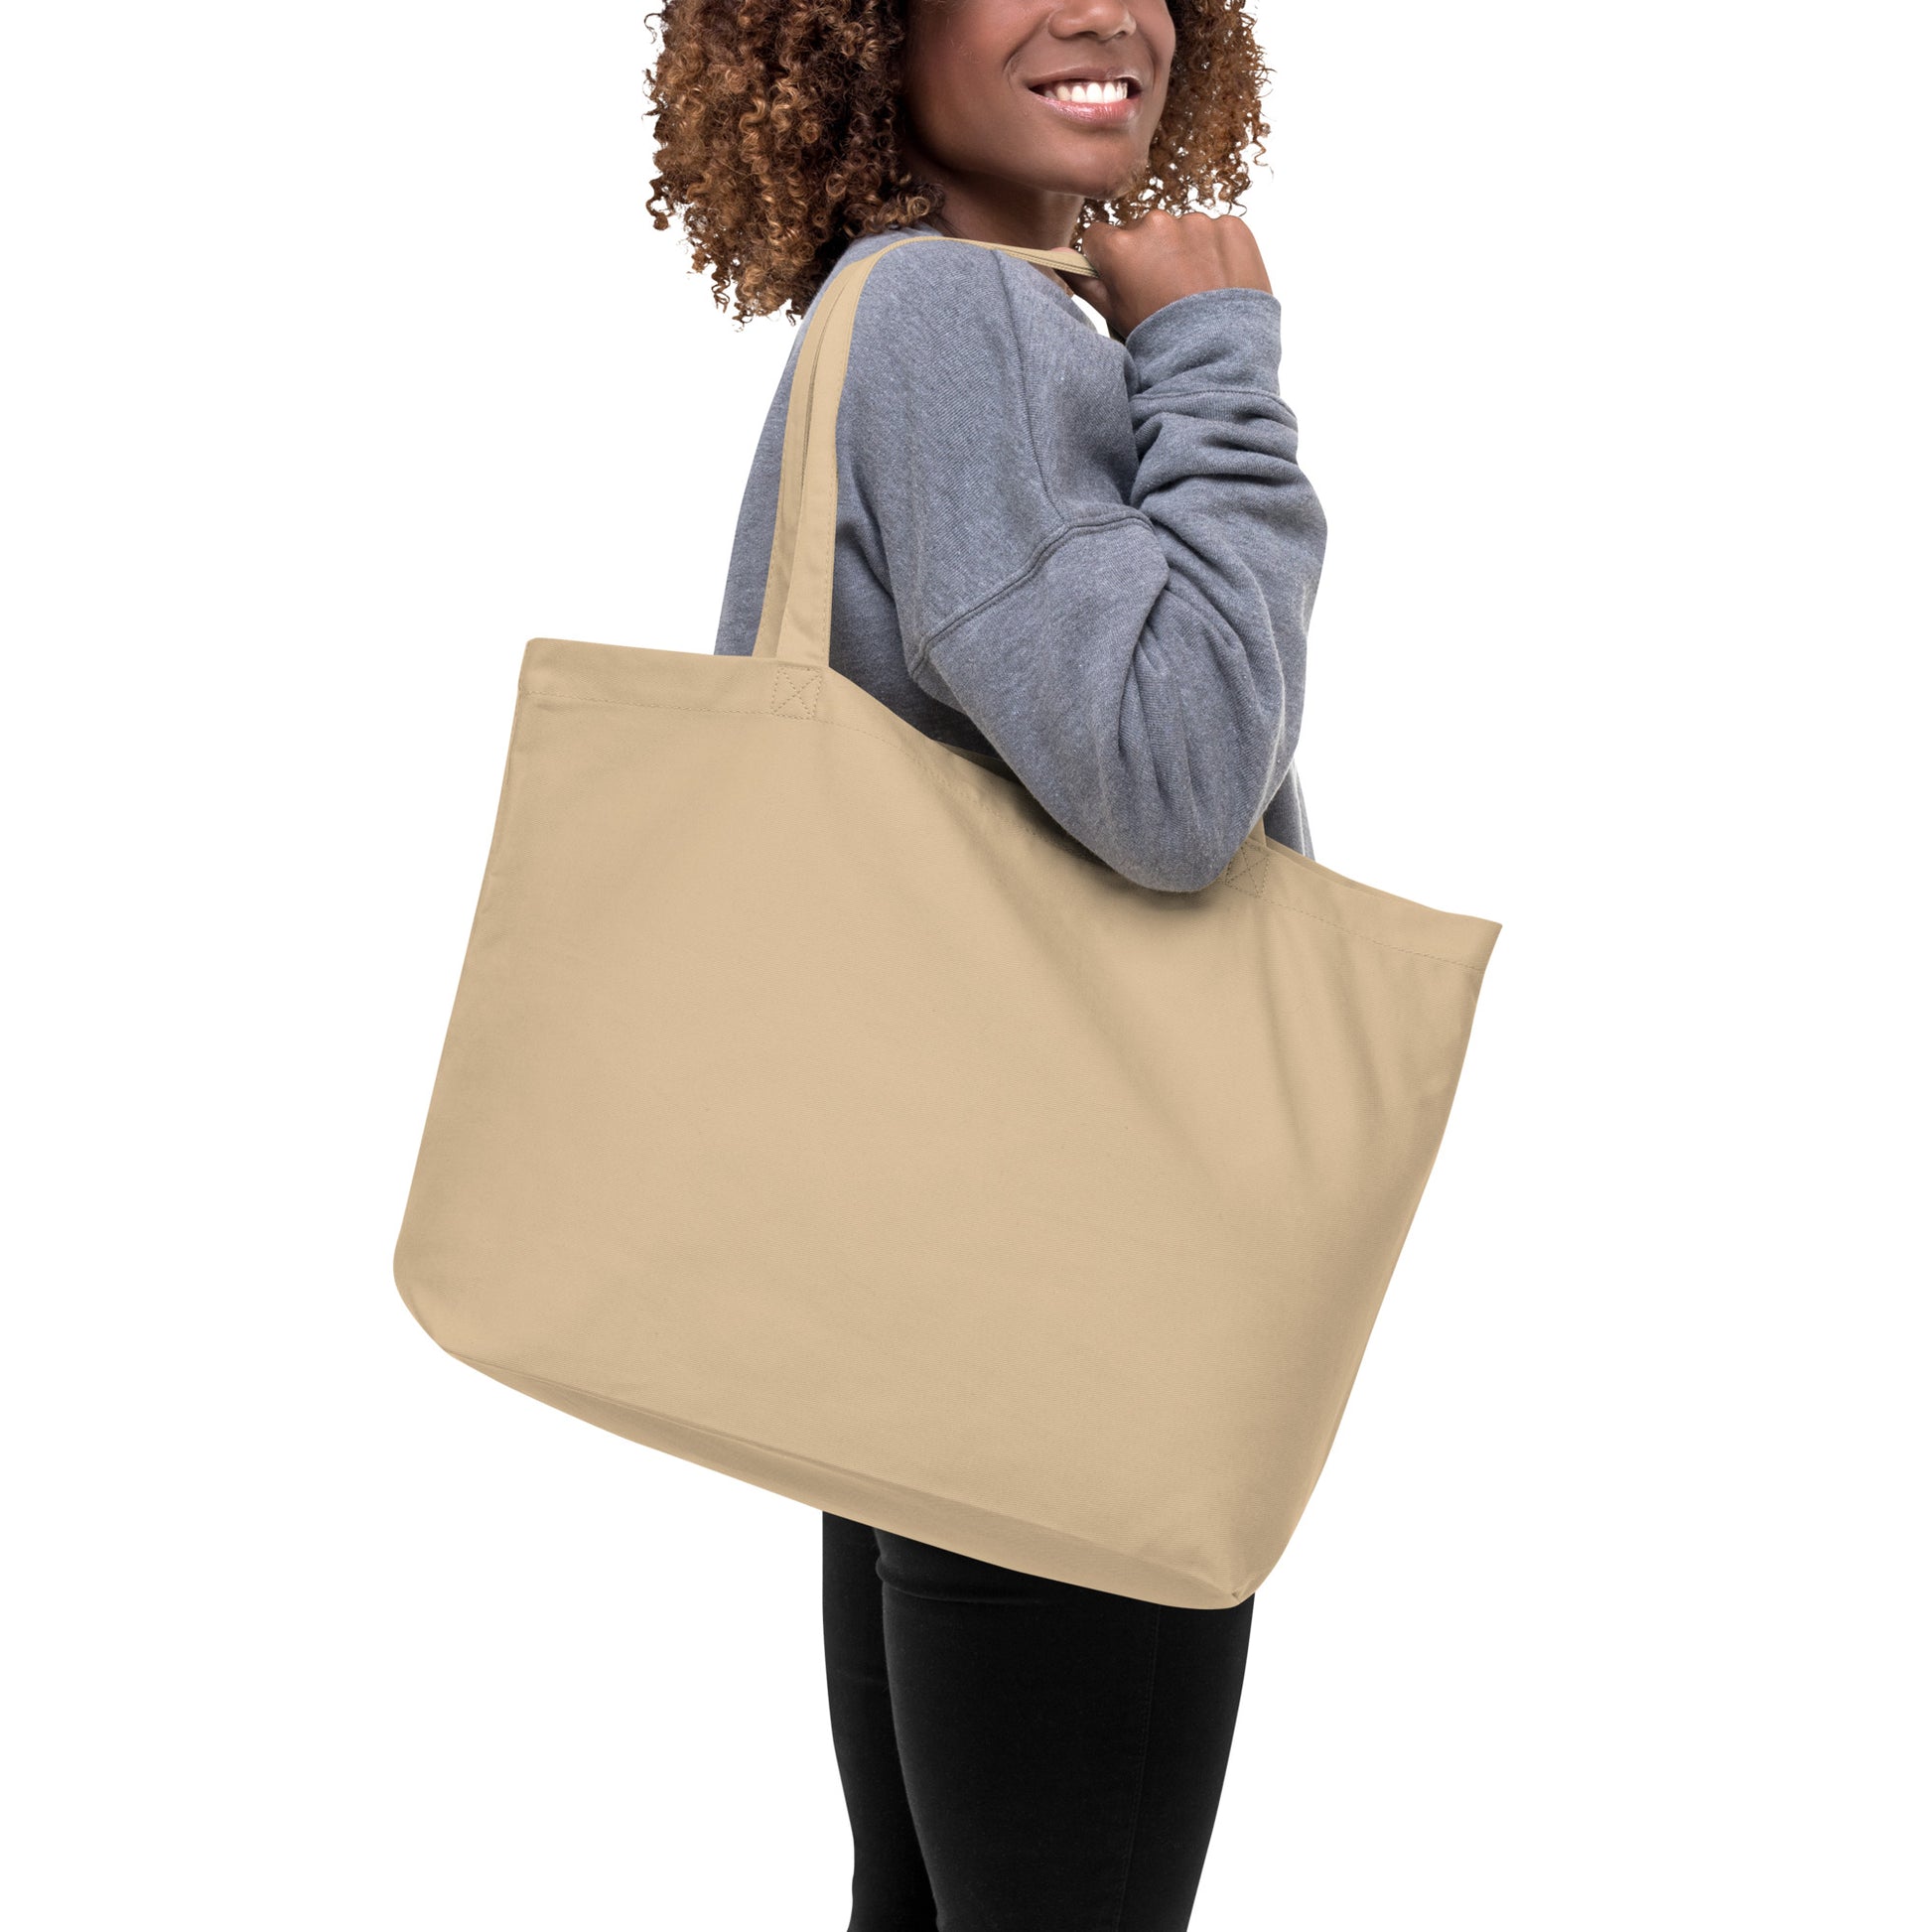 Large tan organic cotton tote bag. Has a watercolor mother hand and chicks print. Holds up to 30 pounds. Shown on model's shoulder.